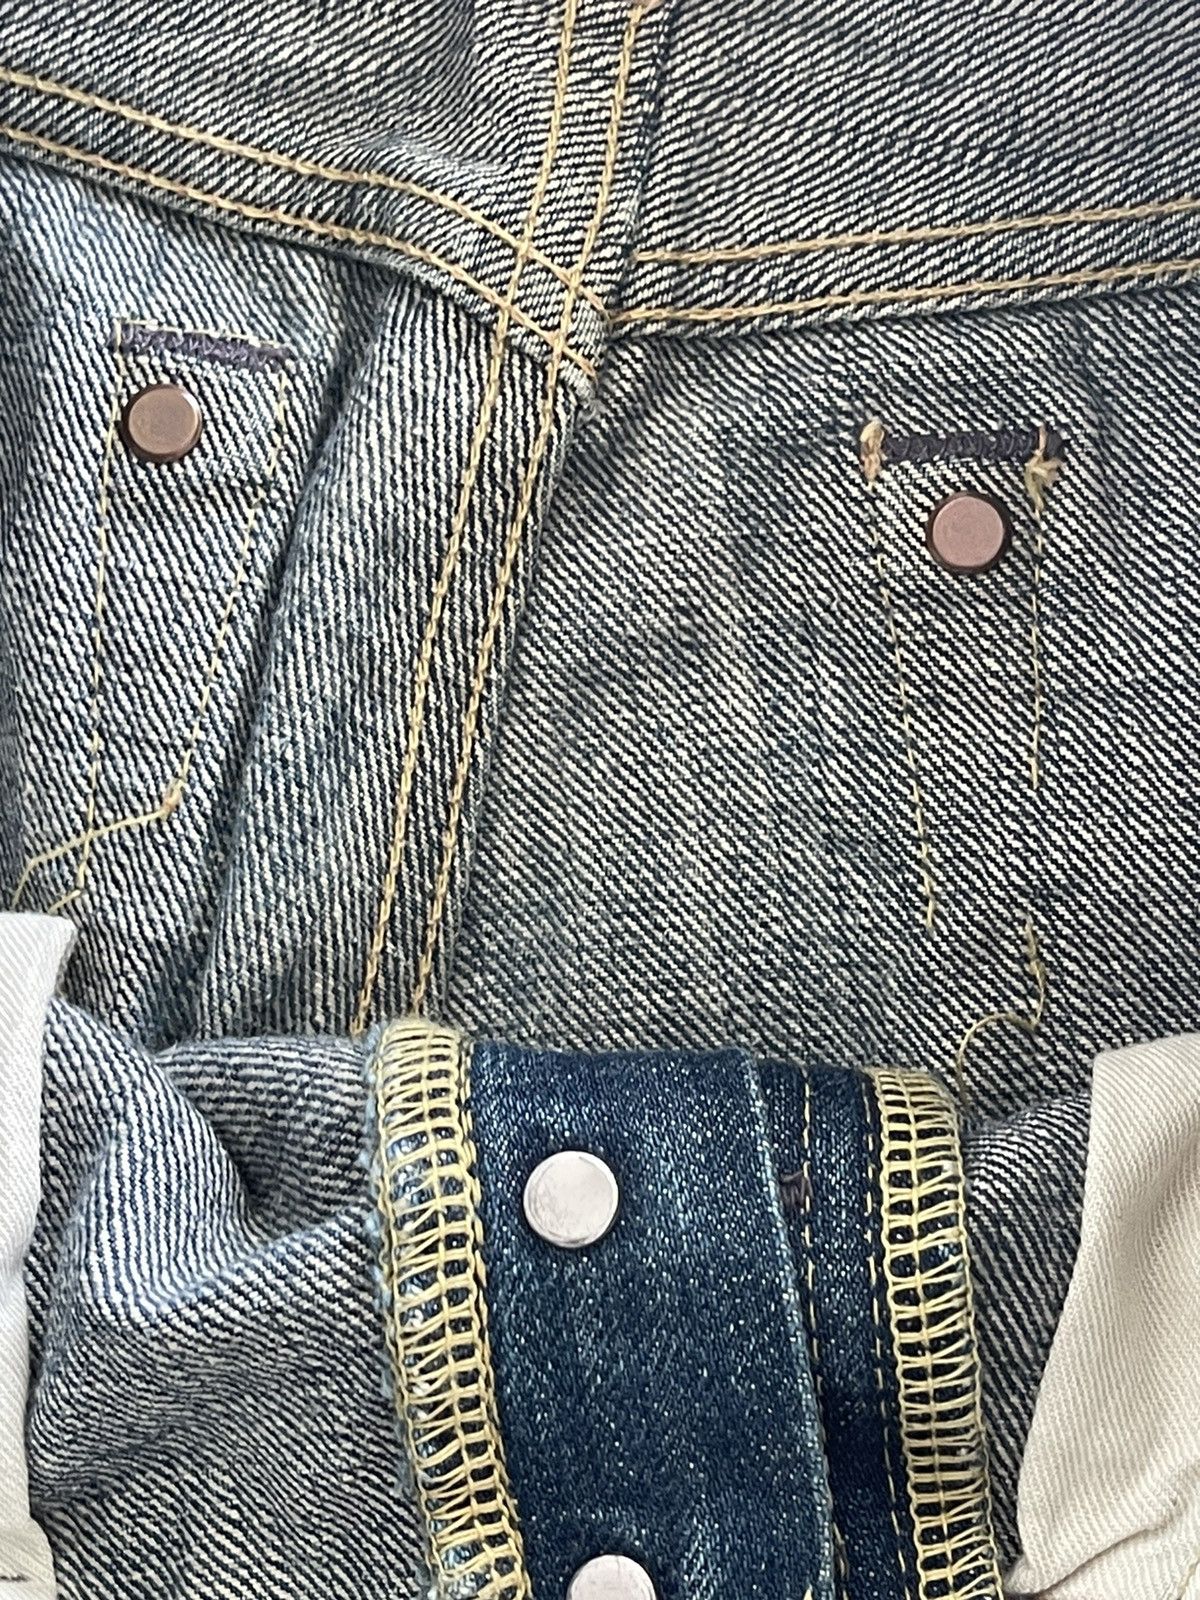 Japanese Brand - JAPANESE REPRO DENIM JEANS, BARNS OUTFITTERS & CO BRAND - 8